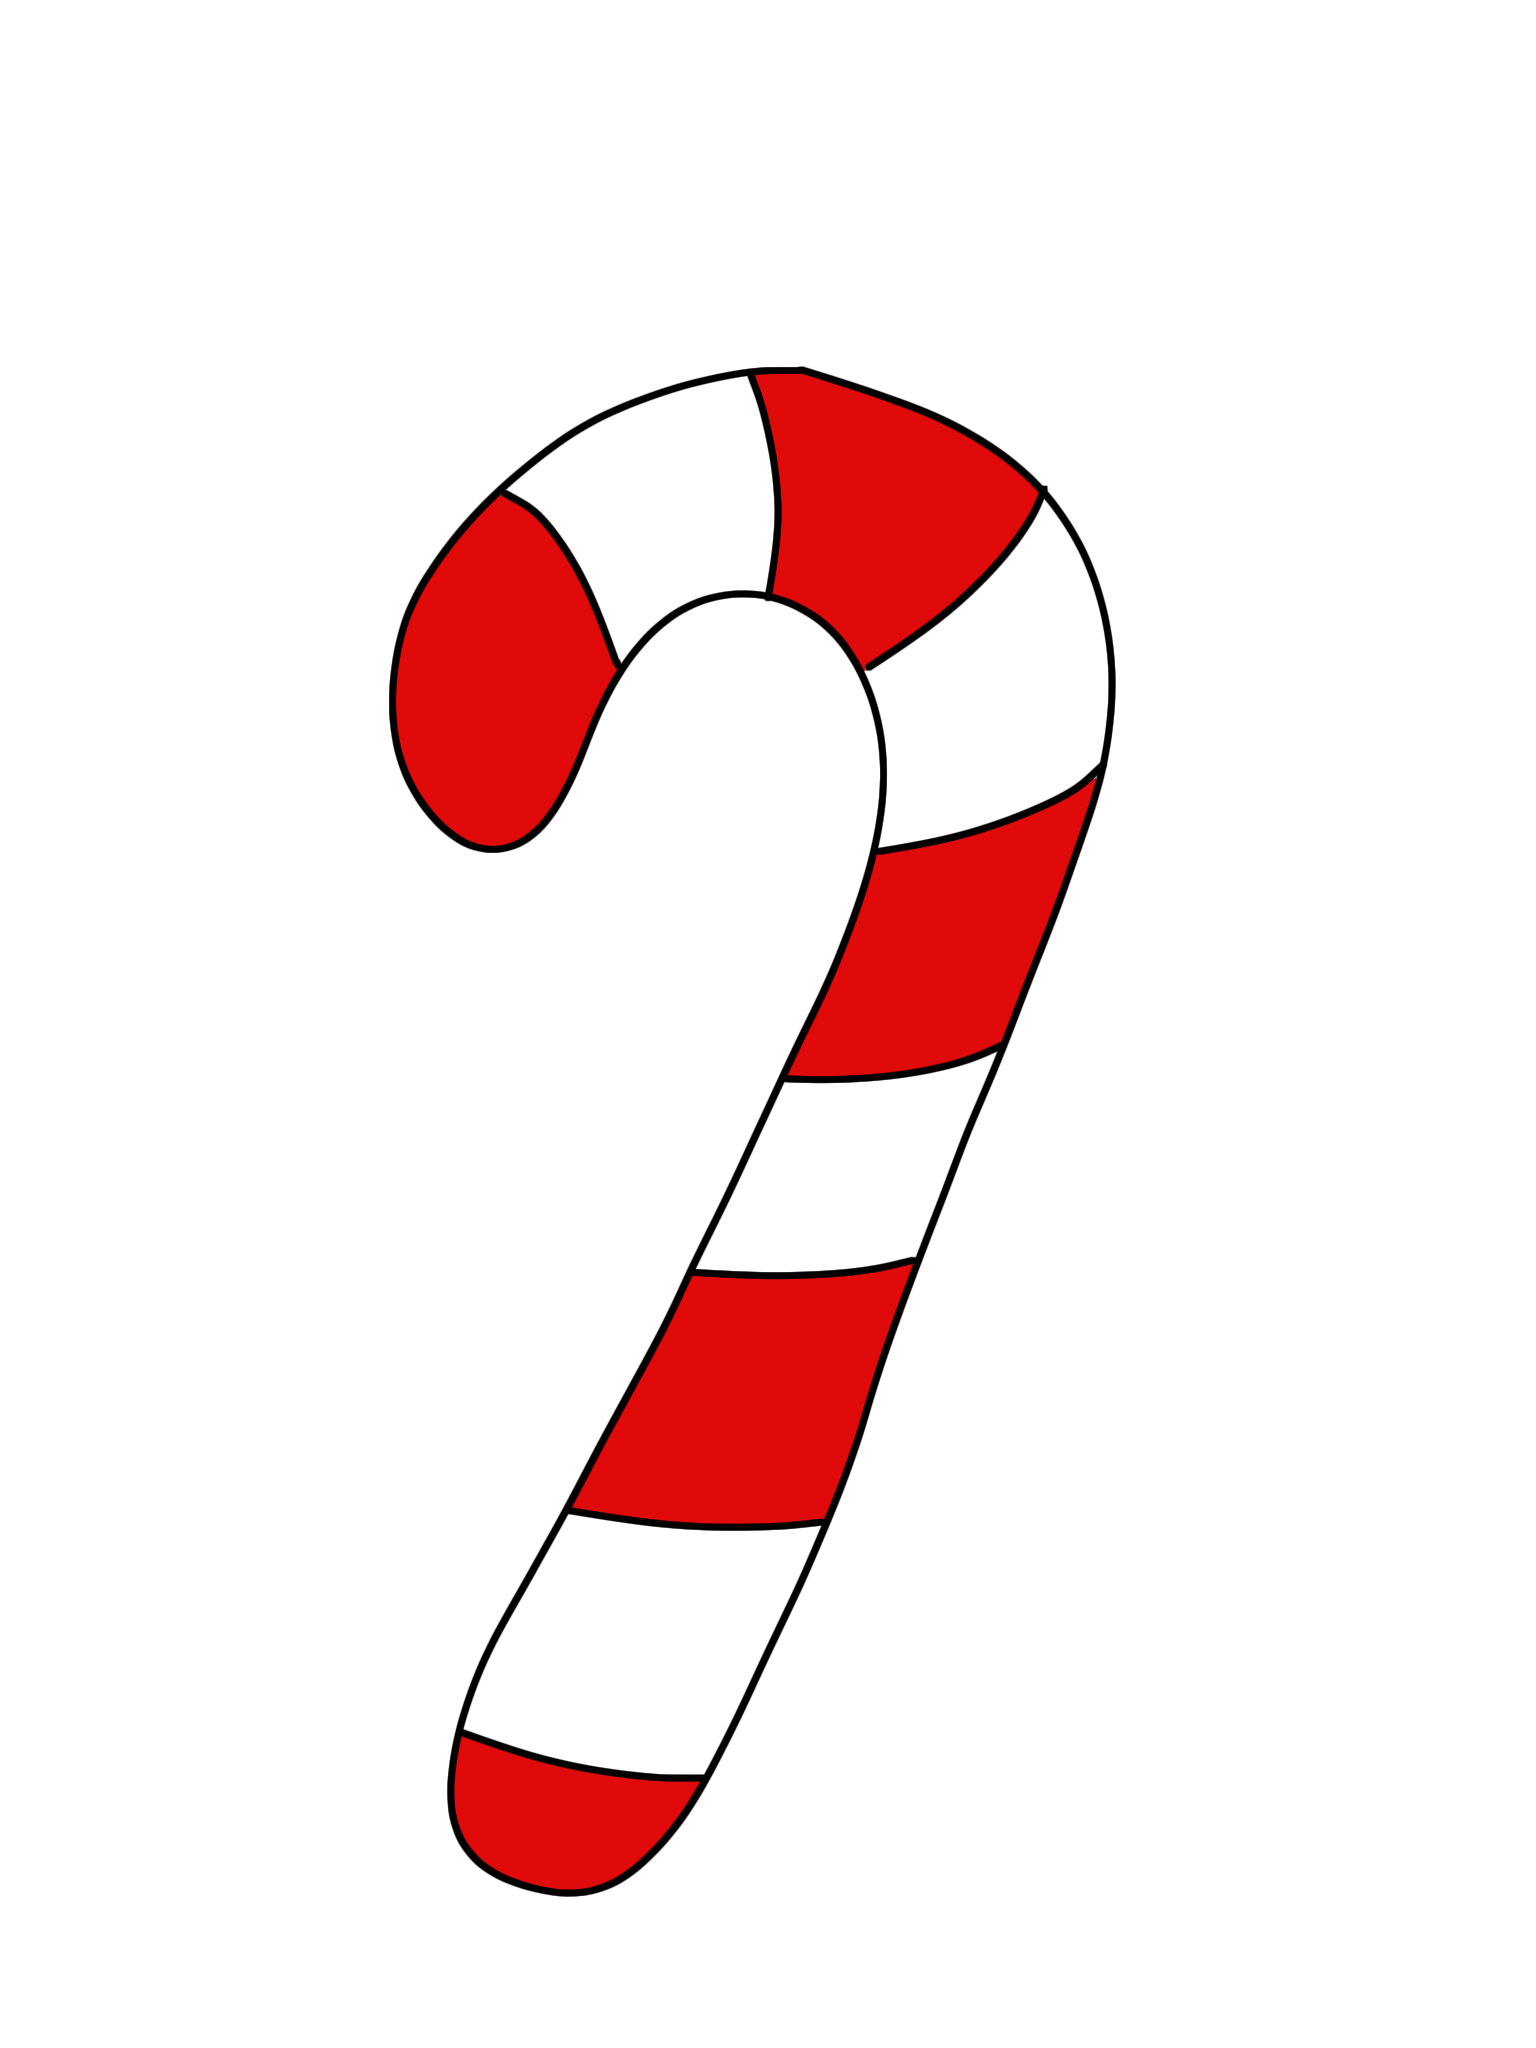 Candy Cane Microsoft Image Hd Image Clipart